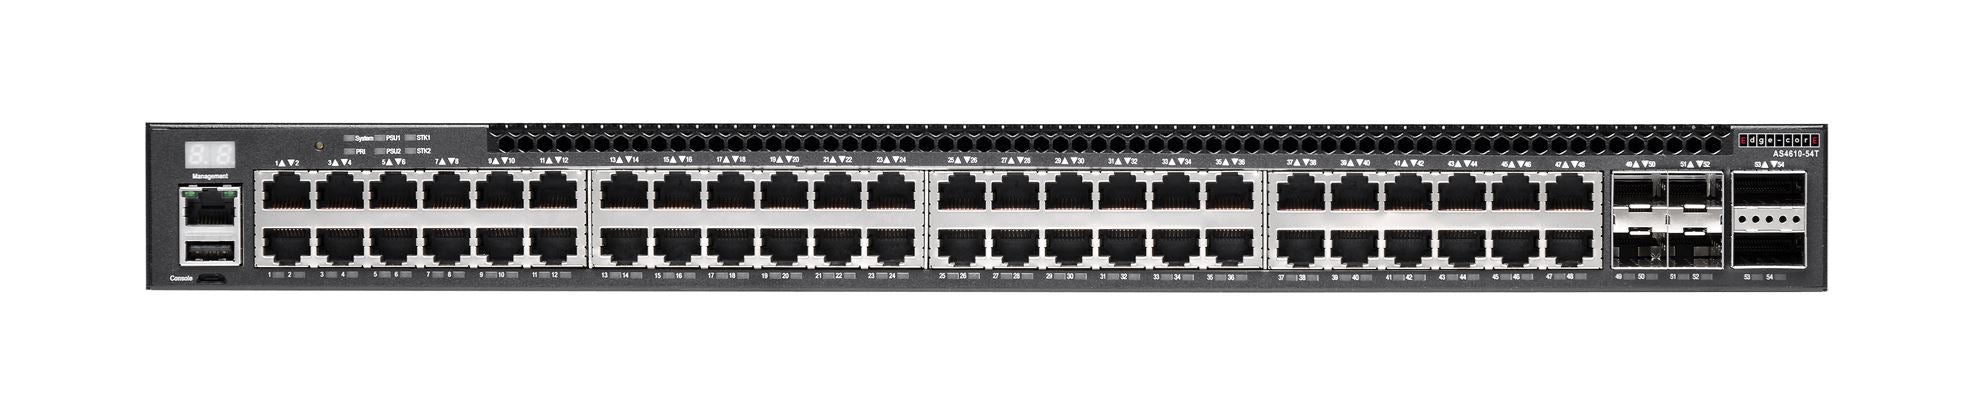 EDGECORE 48 Port GE + 4x 10G SFP+ Switch. 2 port 20G QSFP+ for stacking. Dual -c